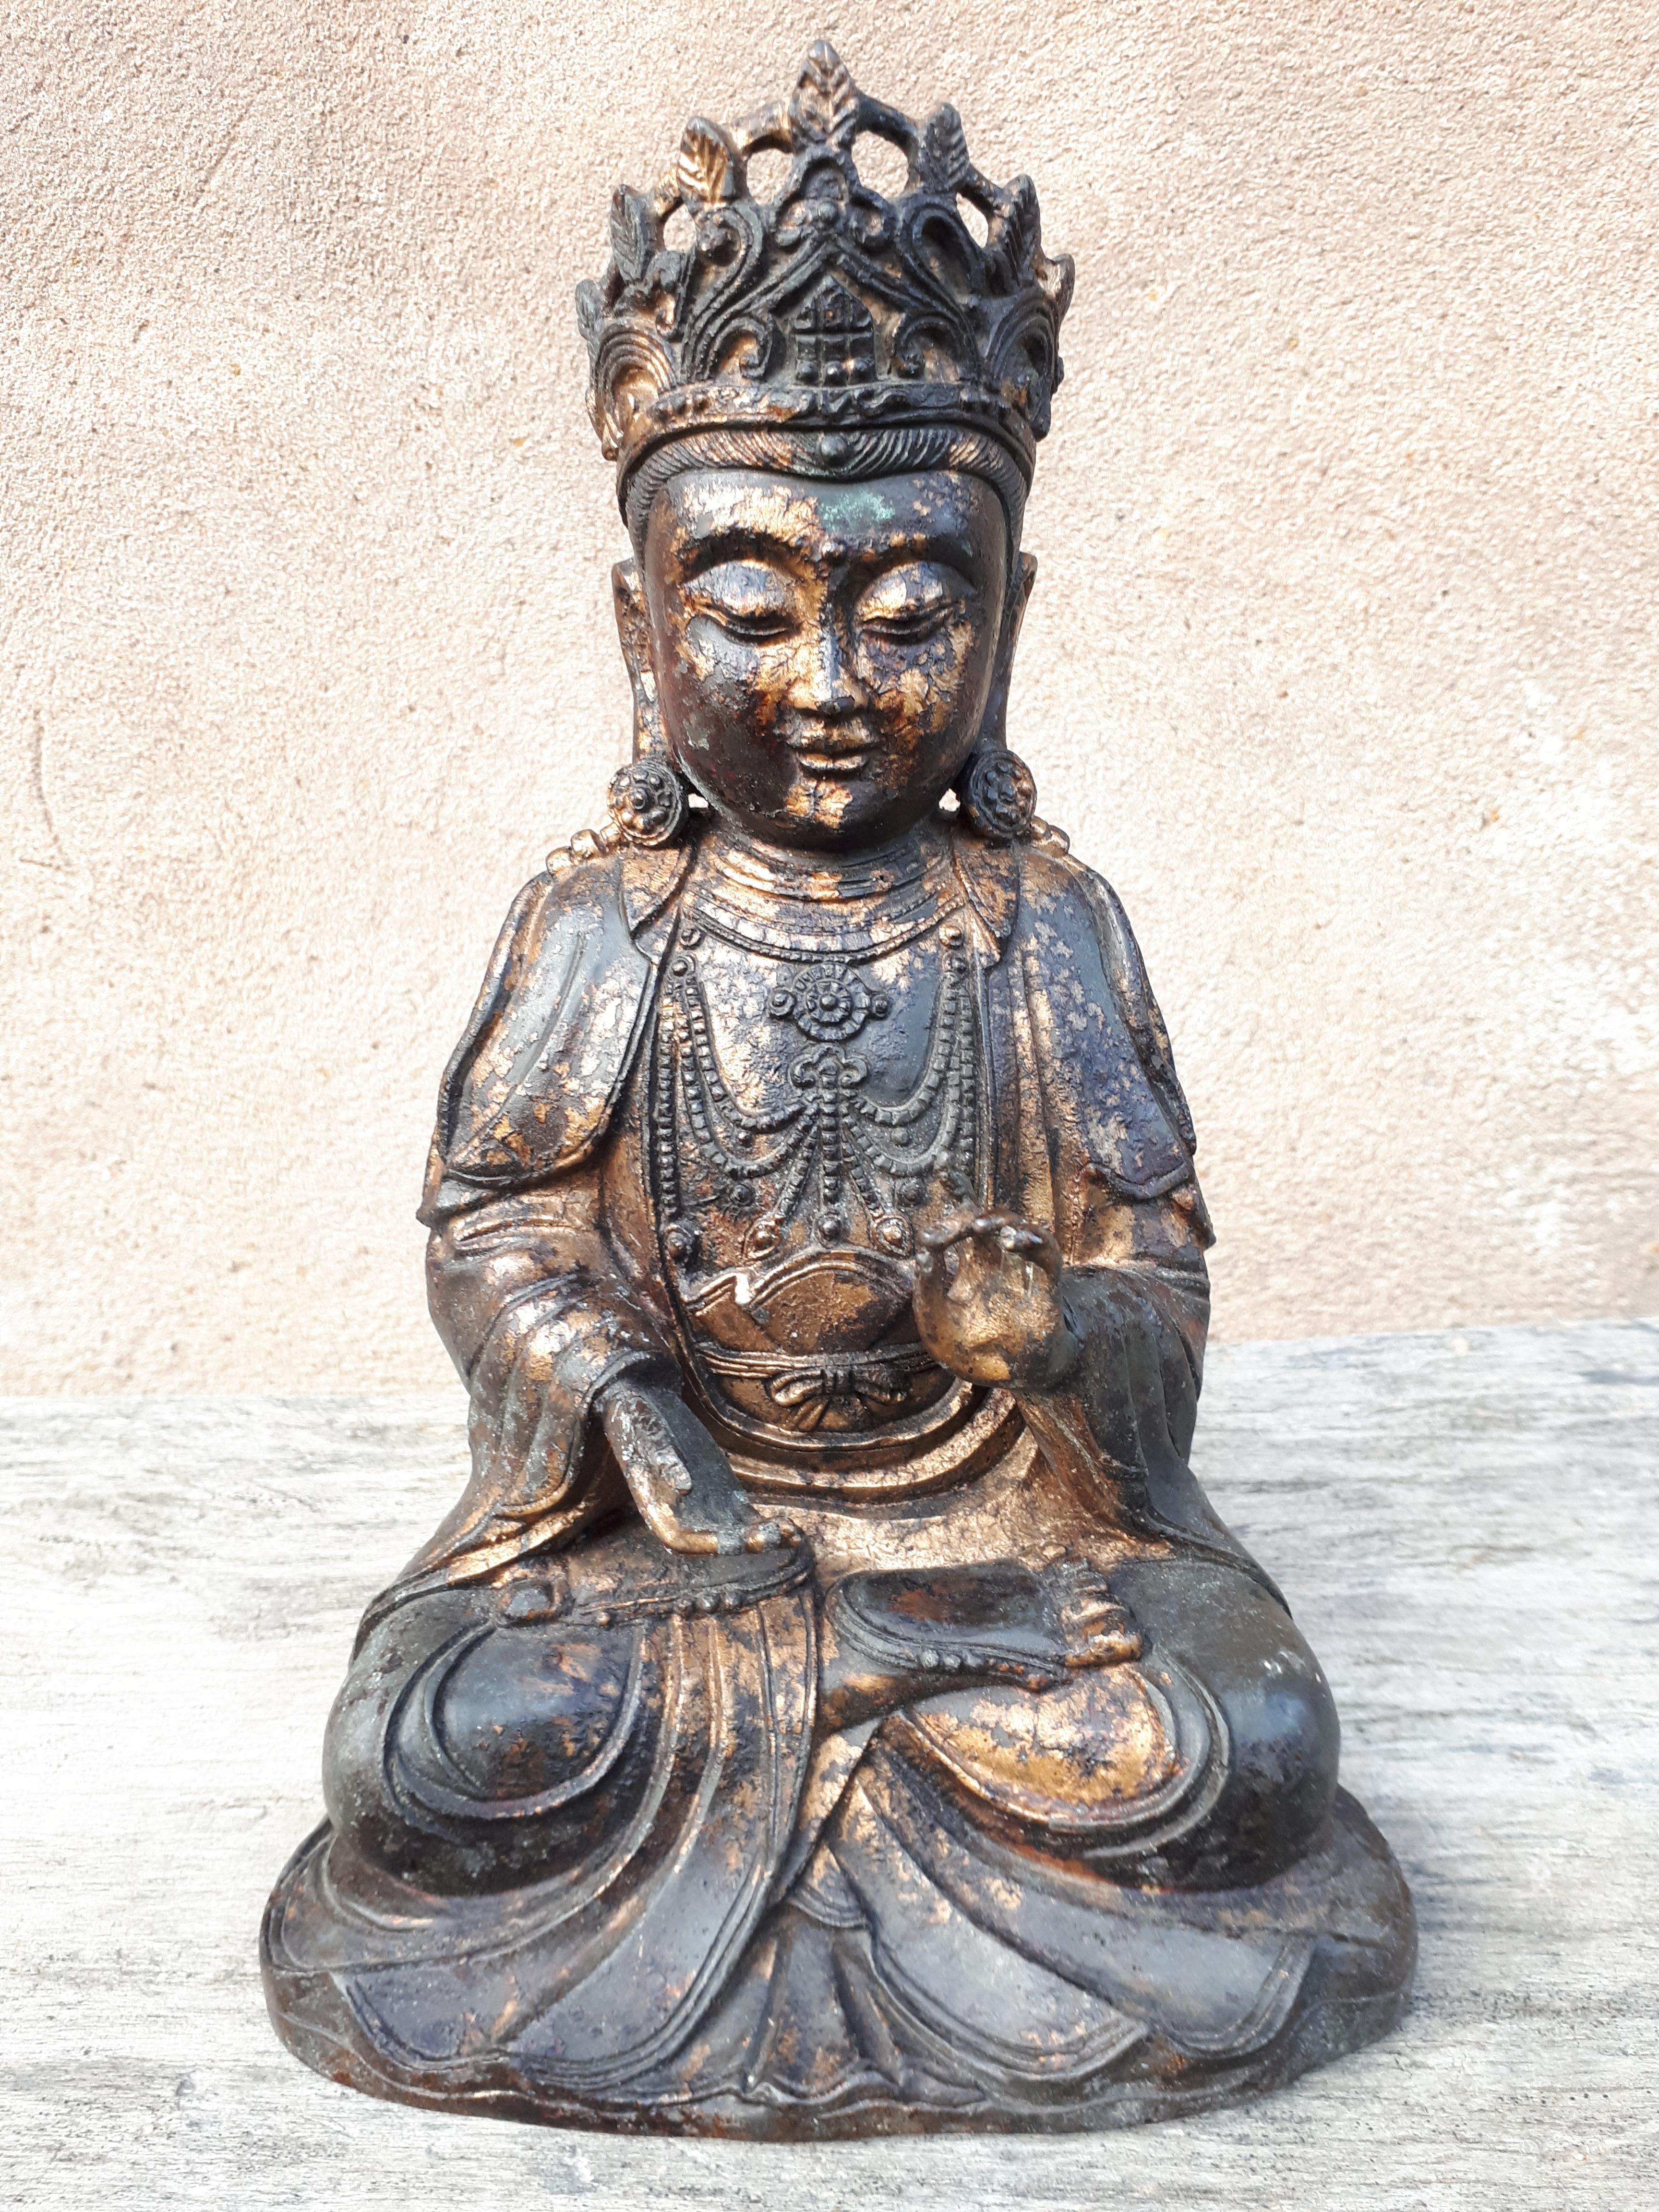 Bronze Guanyin represented seated, left hand held in vitarka mudra, wearing a loose robe with voluminous folds.
Weight: 1.977 kg.